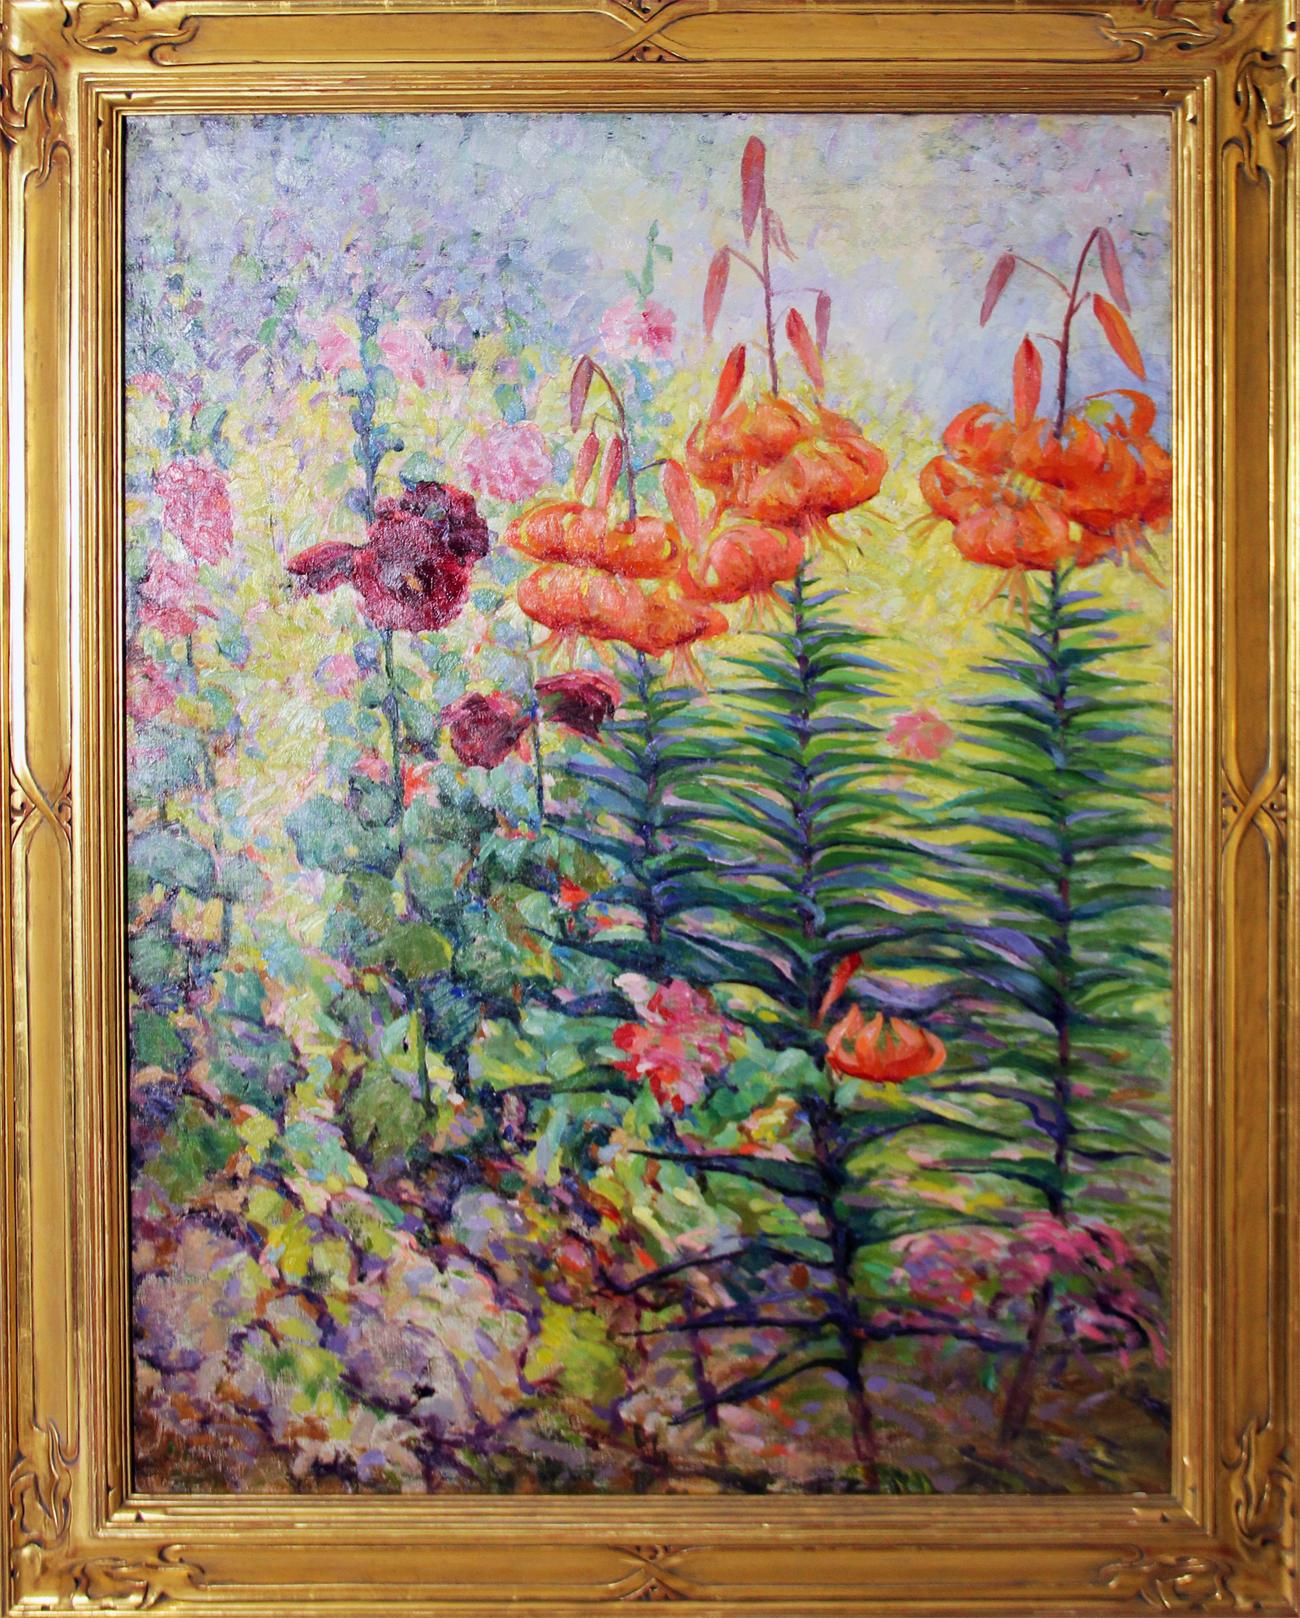 "Tiger Lillies" by Henry Ryan MacGinnis is a 40" x 30" oil on canvas floral painting. The work comes from the estate of the artist and is monogrammed on front and signed on verso. The painting is framed in a 22K gold reproduction frame. Additional